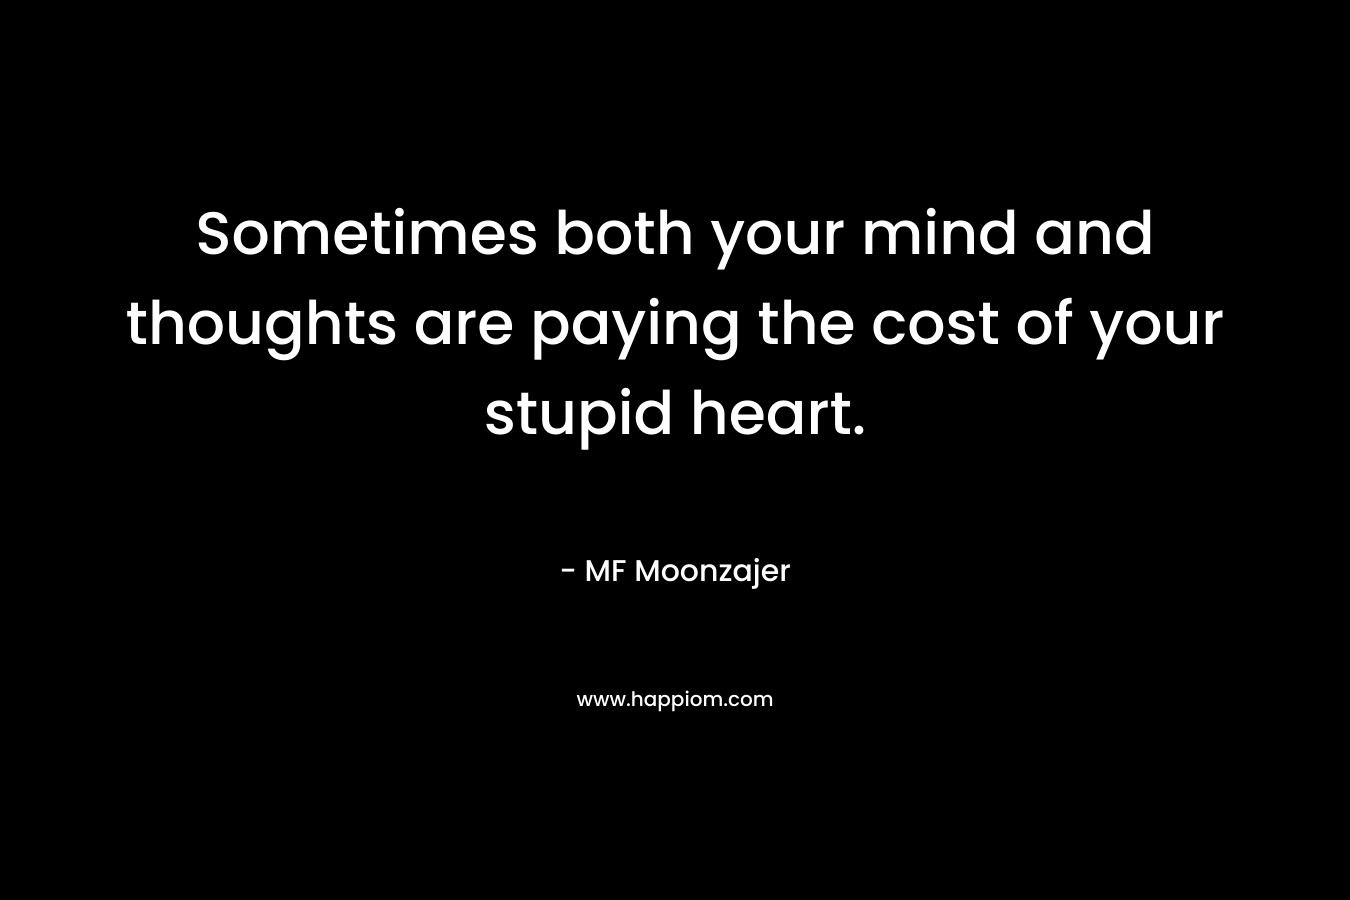 Sometimes both your mind and thoughts are paying the cost of your stupid heart.